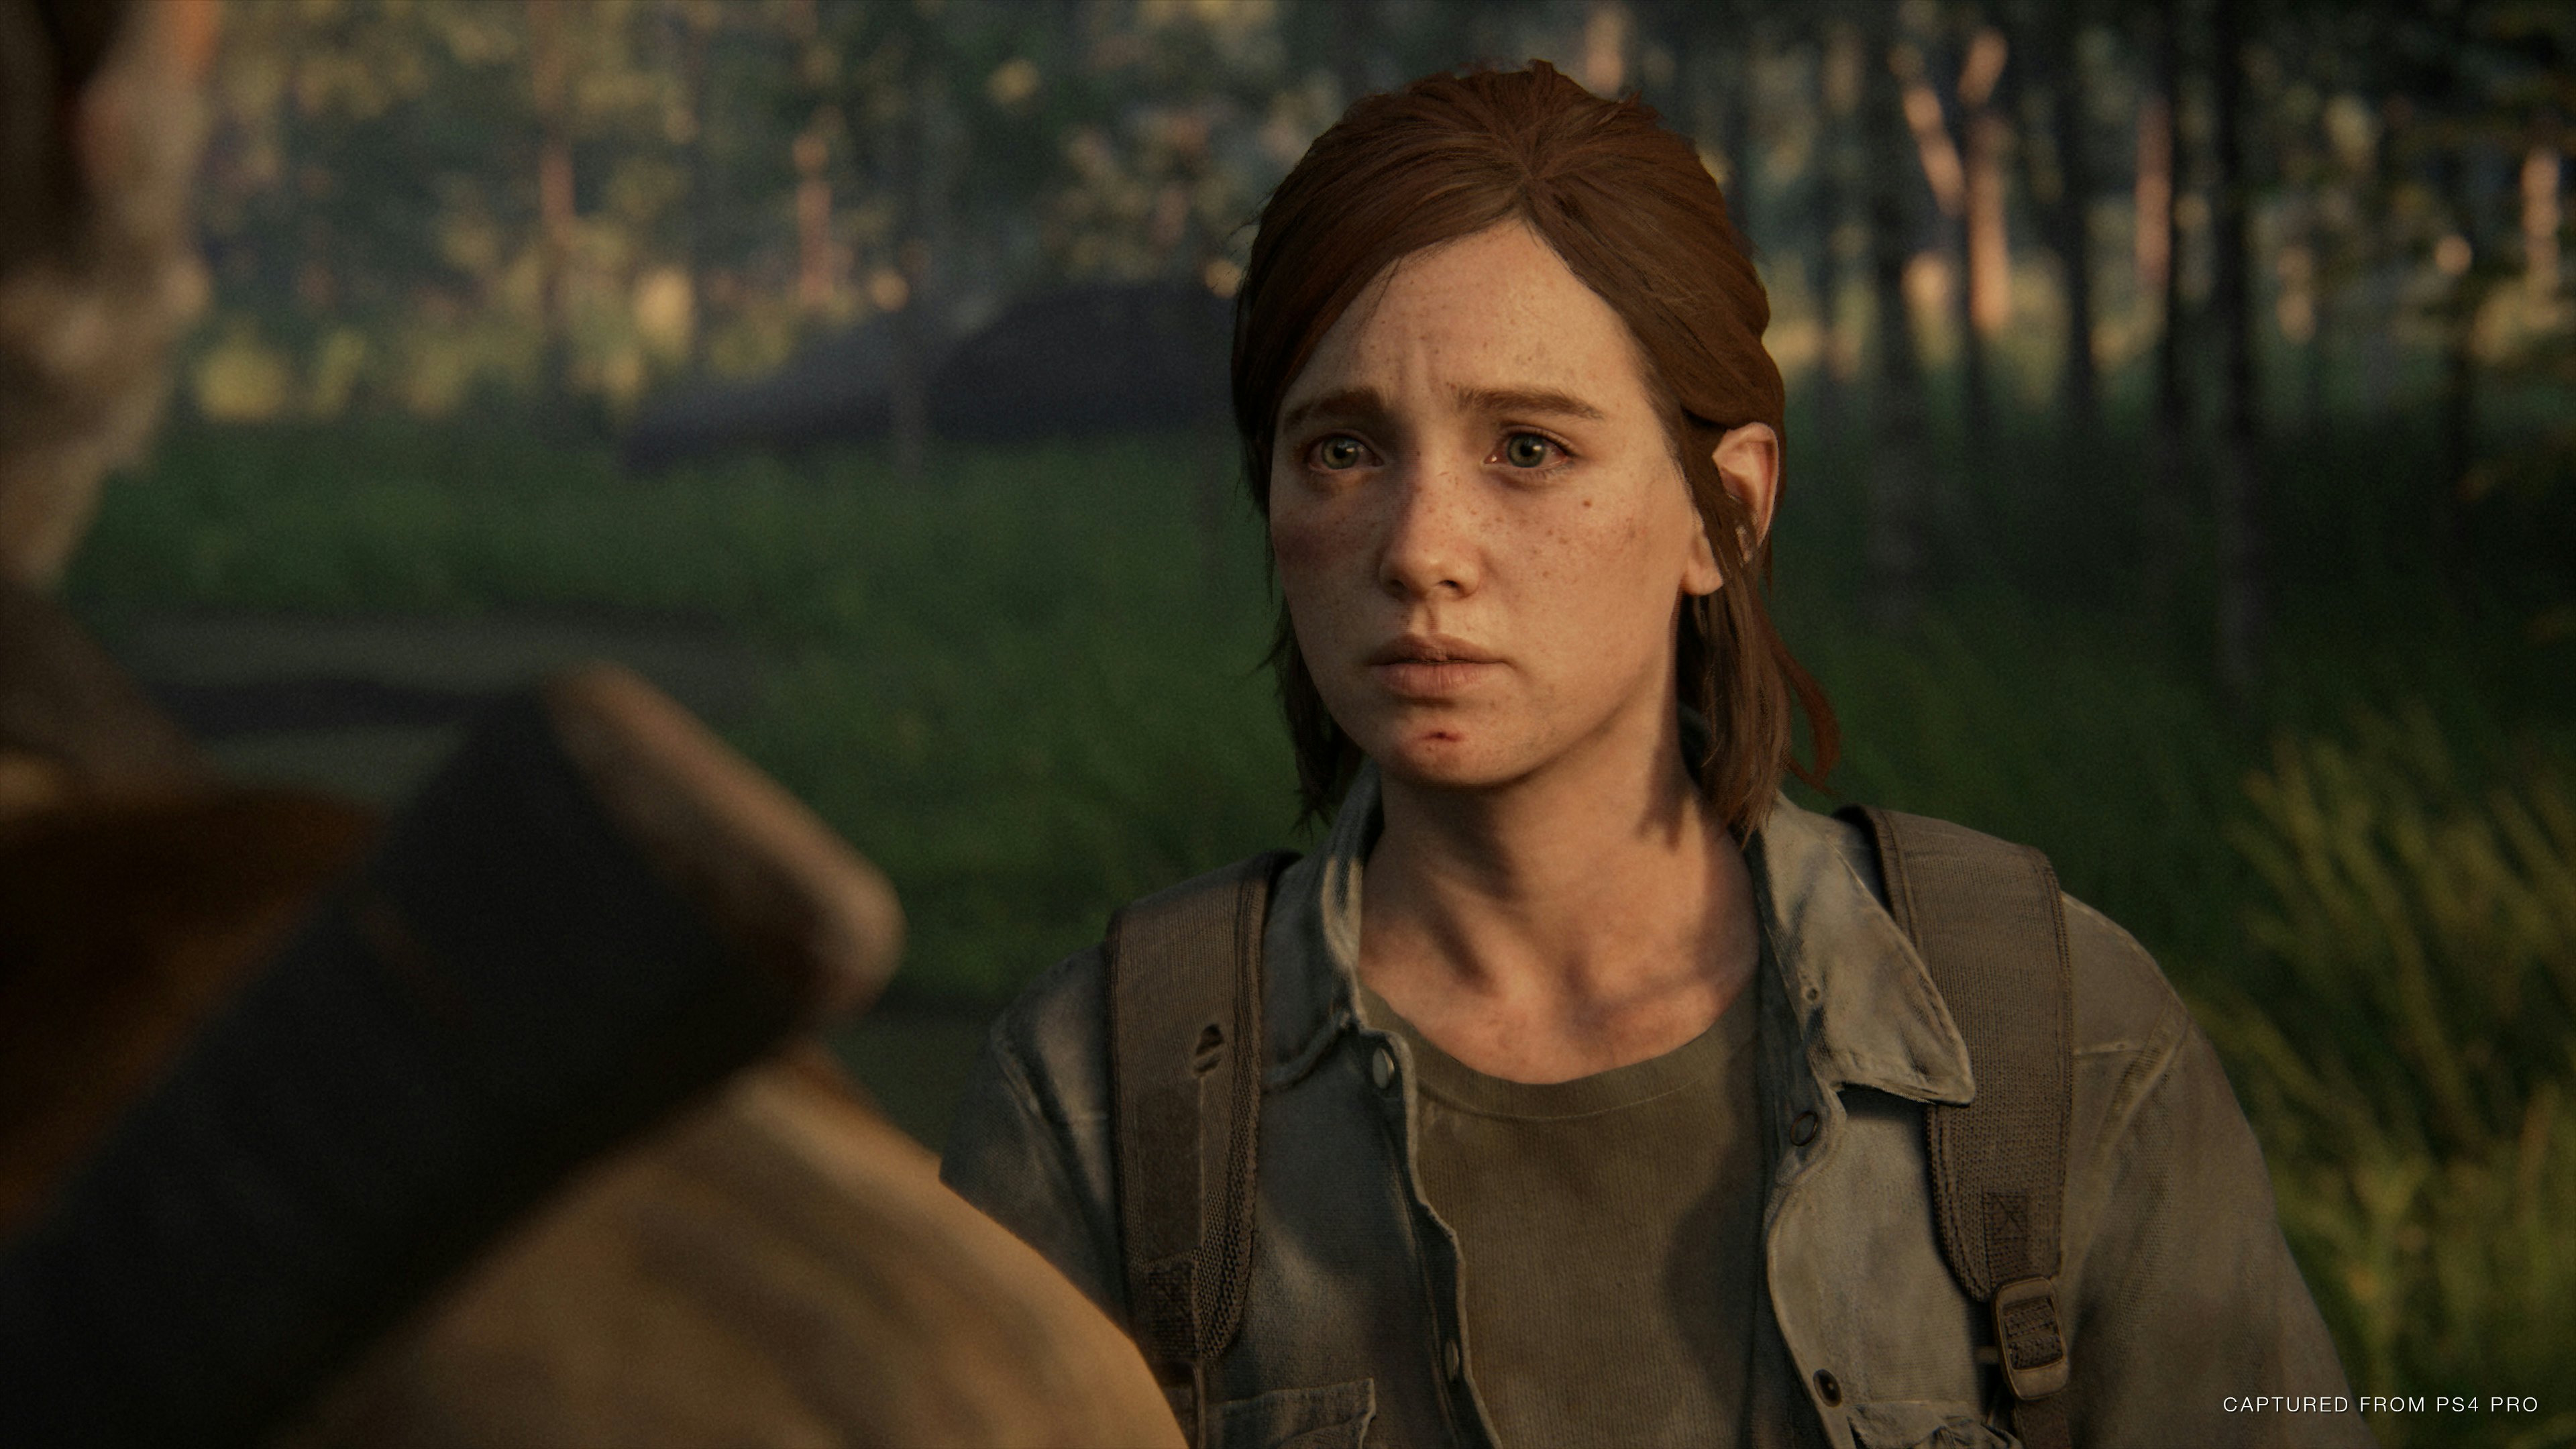 will the last of us part 2 be on ps5